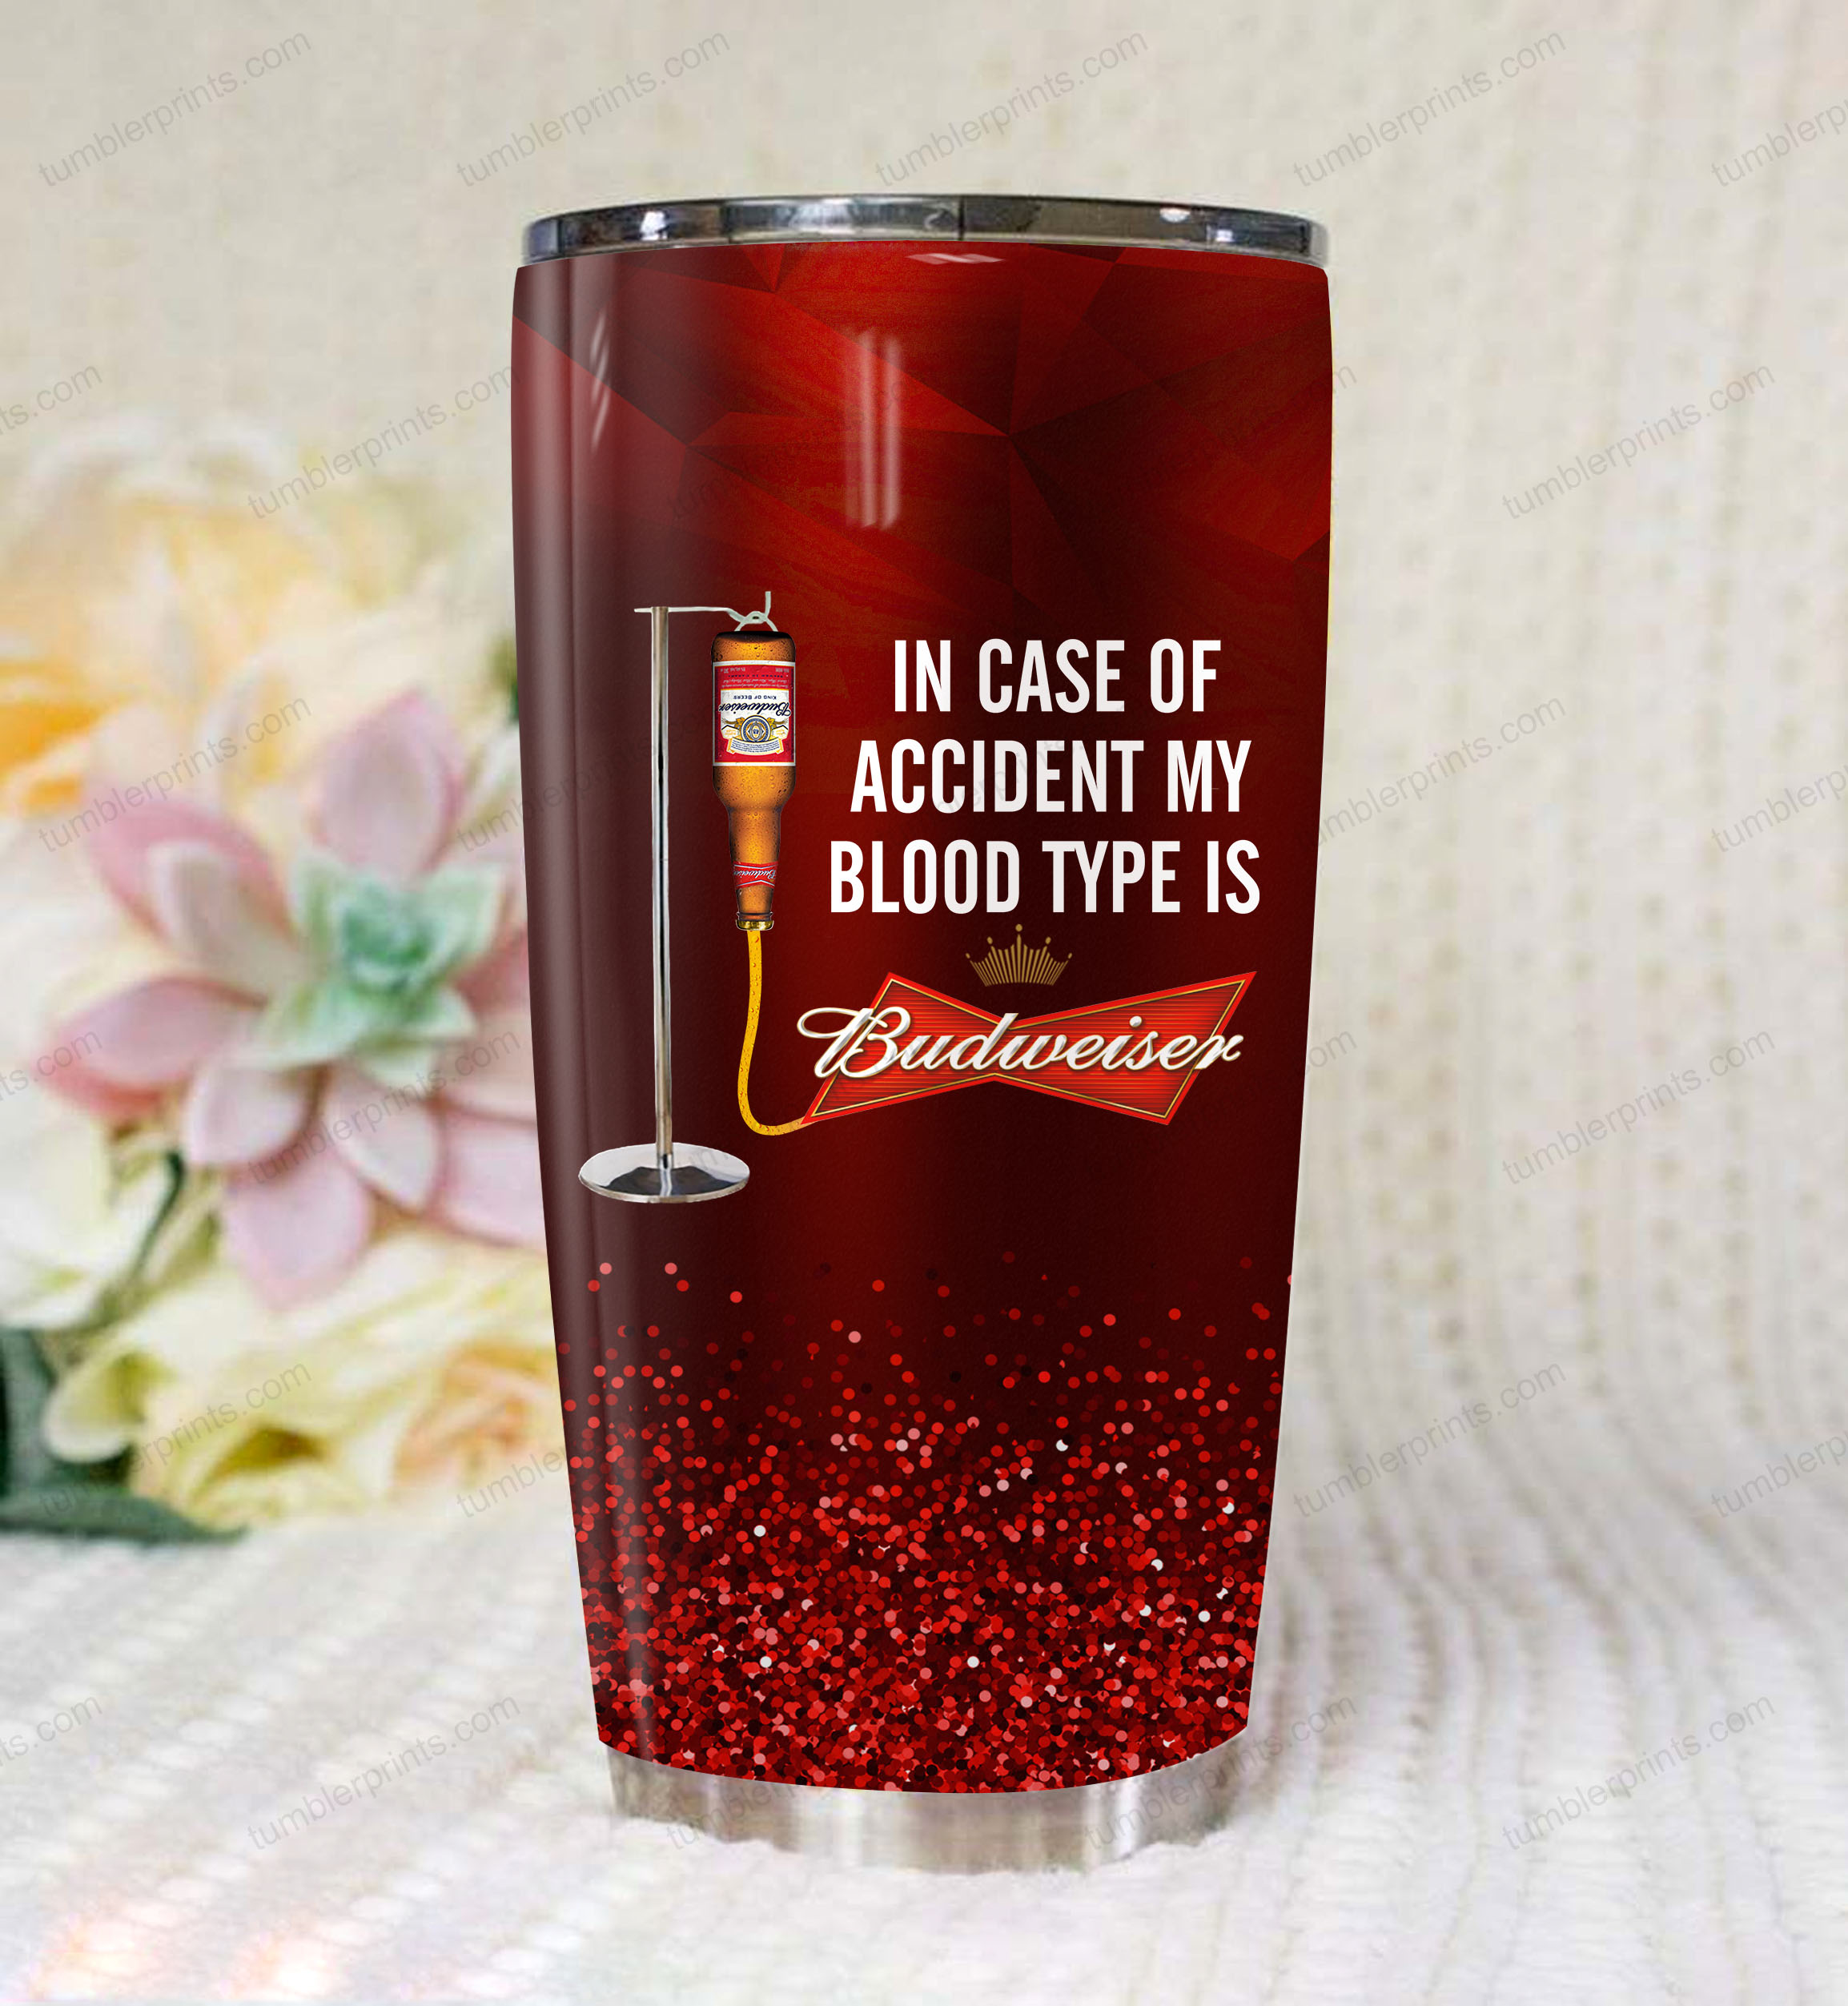 In case of an accident my blood type is budweiser full printing tumbler 2